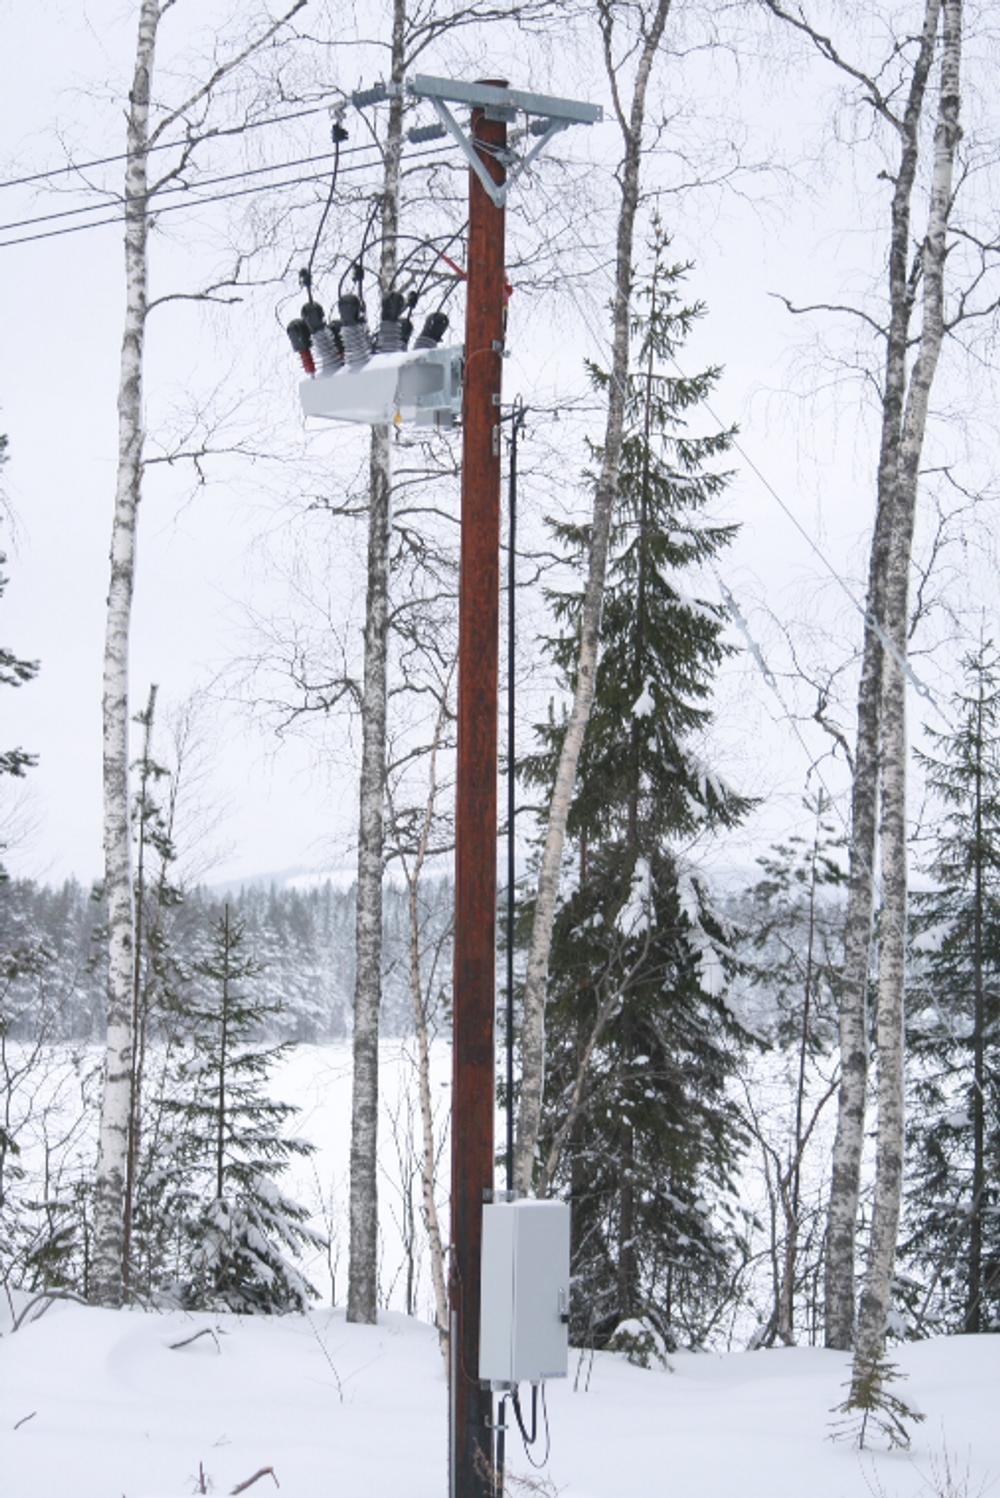 NOJA Power OSM Recloser installation in Sweden under sub zero temperatures, surrounded by snow and snow covered trees